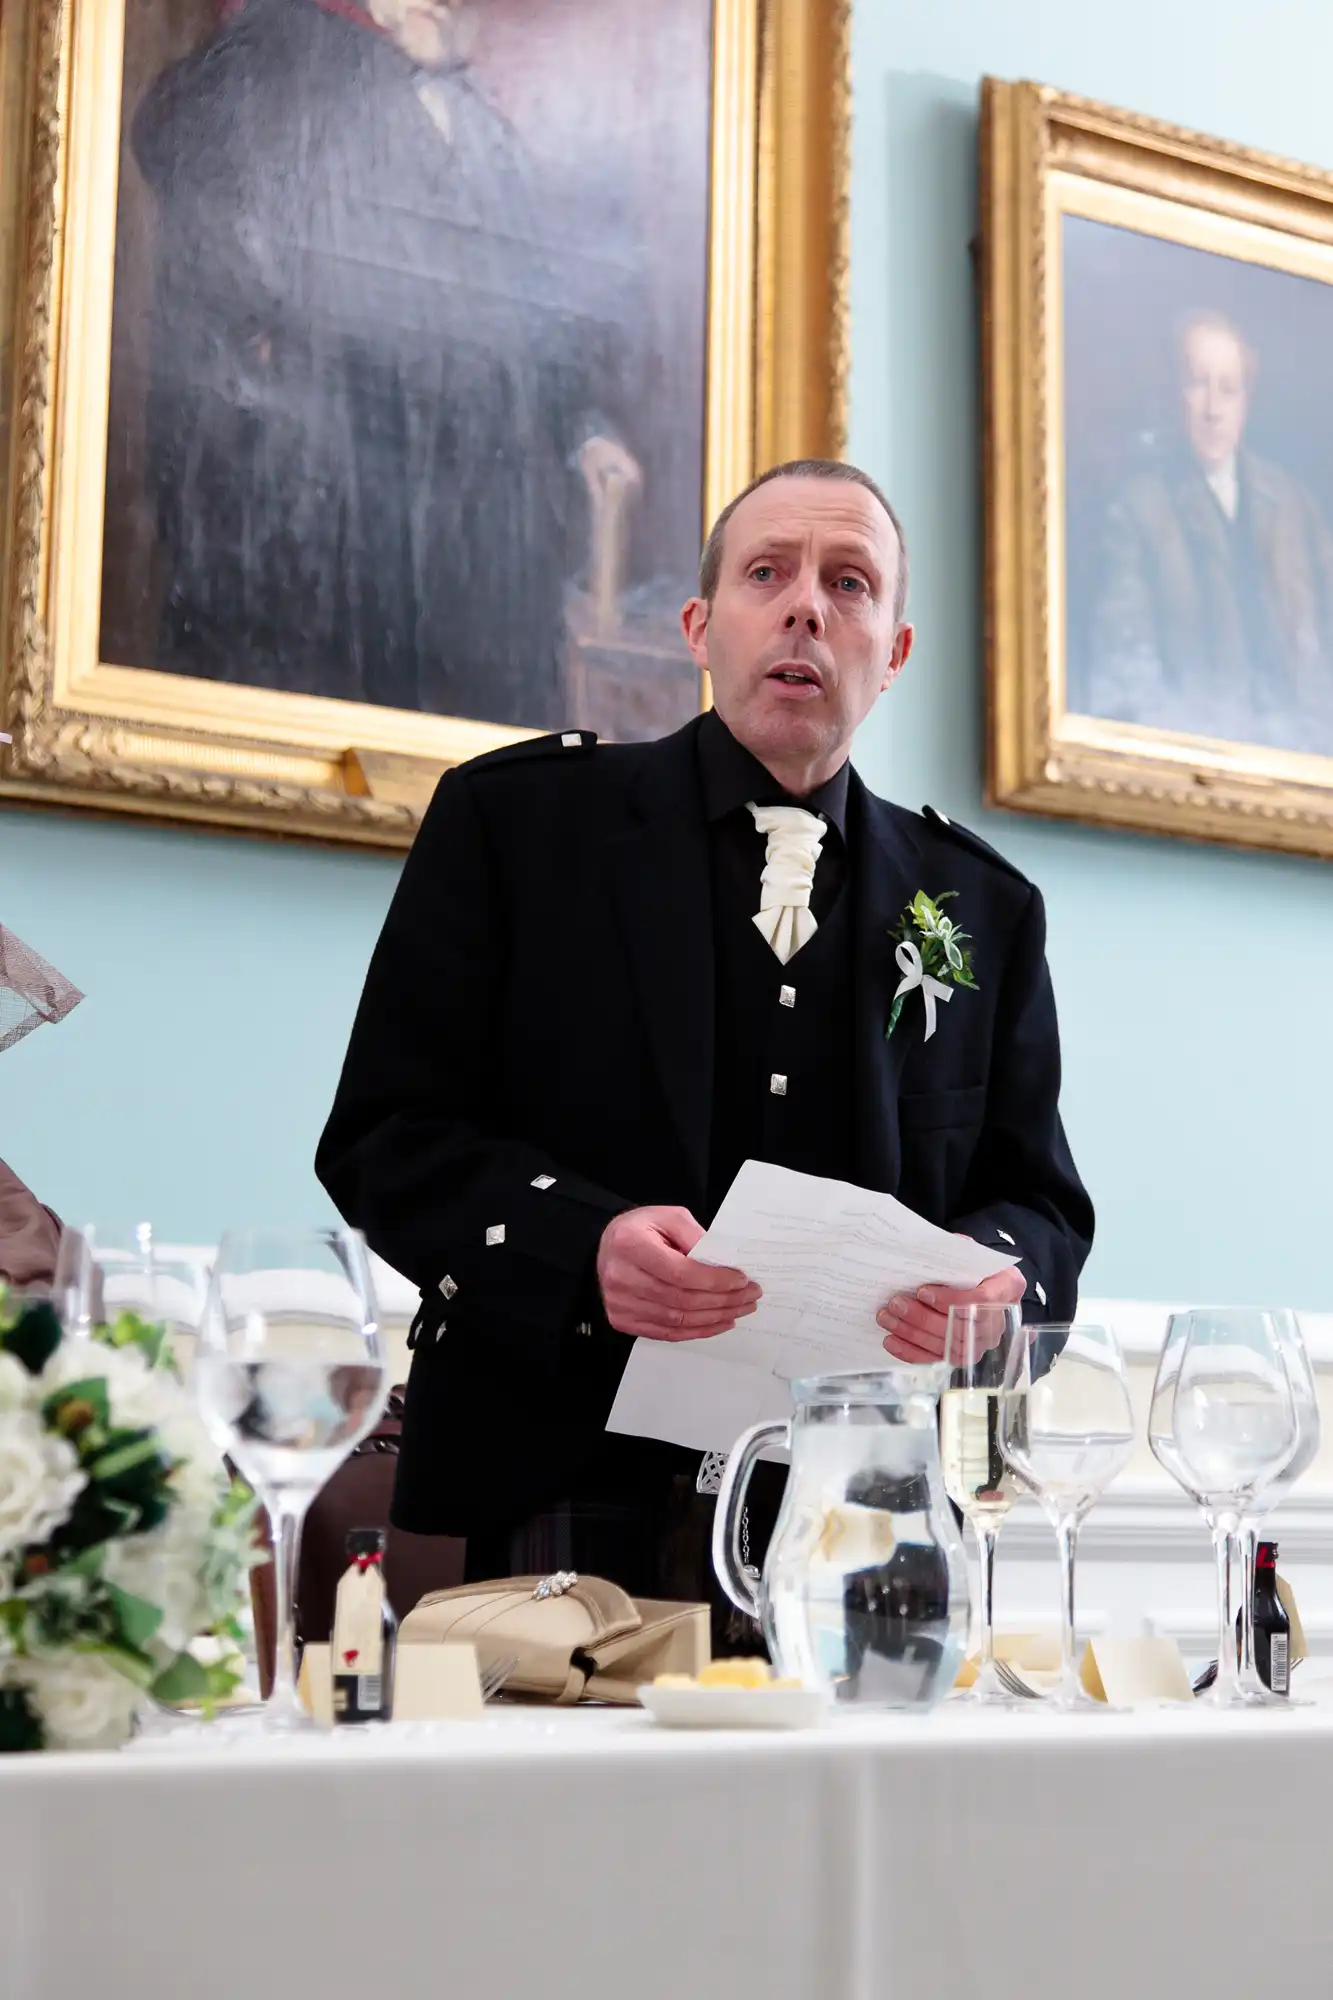 A man in a formal black suit and boutonniere giving a speech at a wedding reception, holding a paper, with paintings in the background.